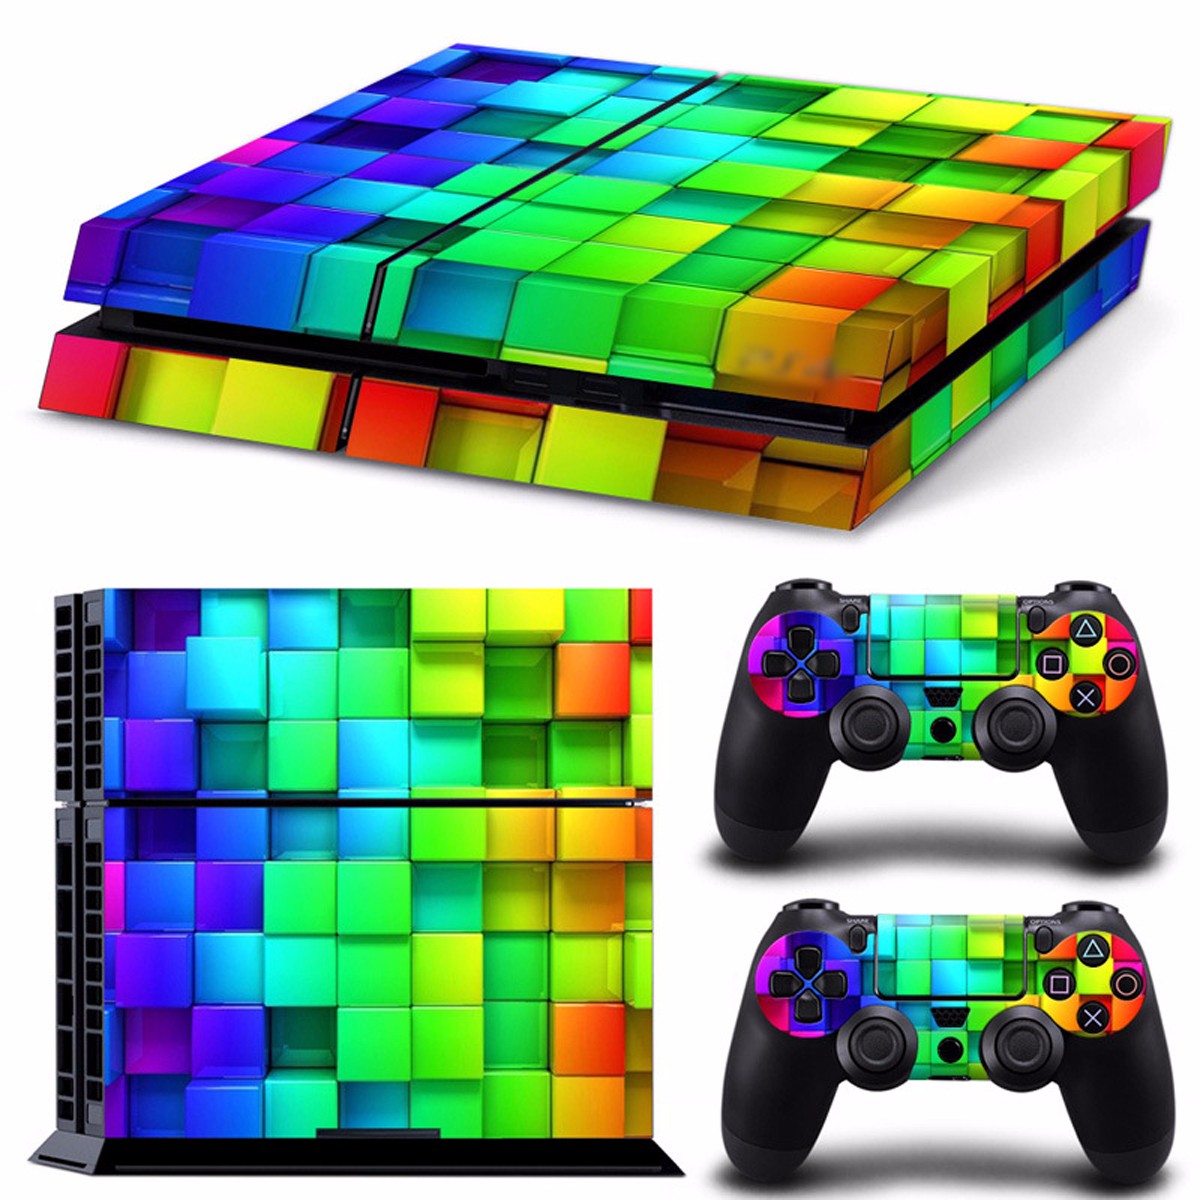 Lattice Style Vinyl Skin Decal For PS4 Play Station 4 Console and 2 Controllers 16